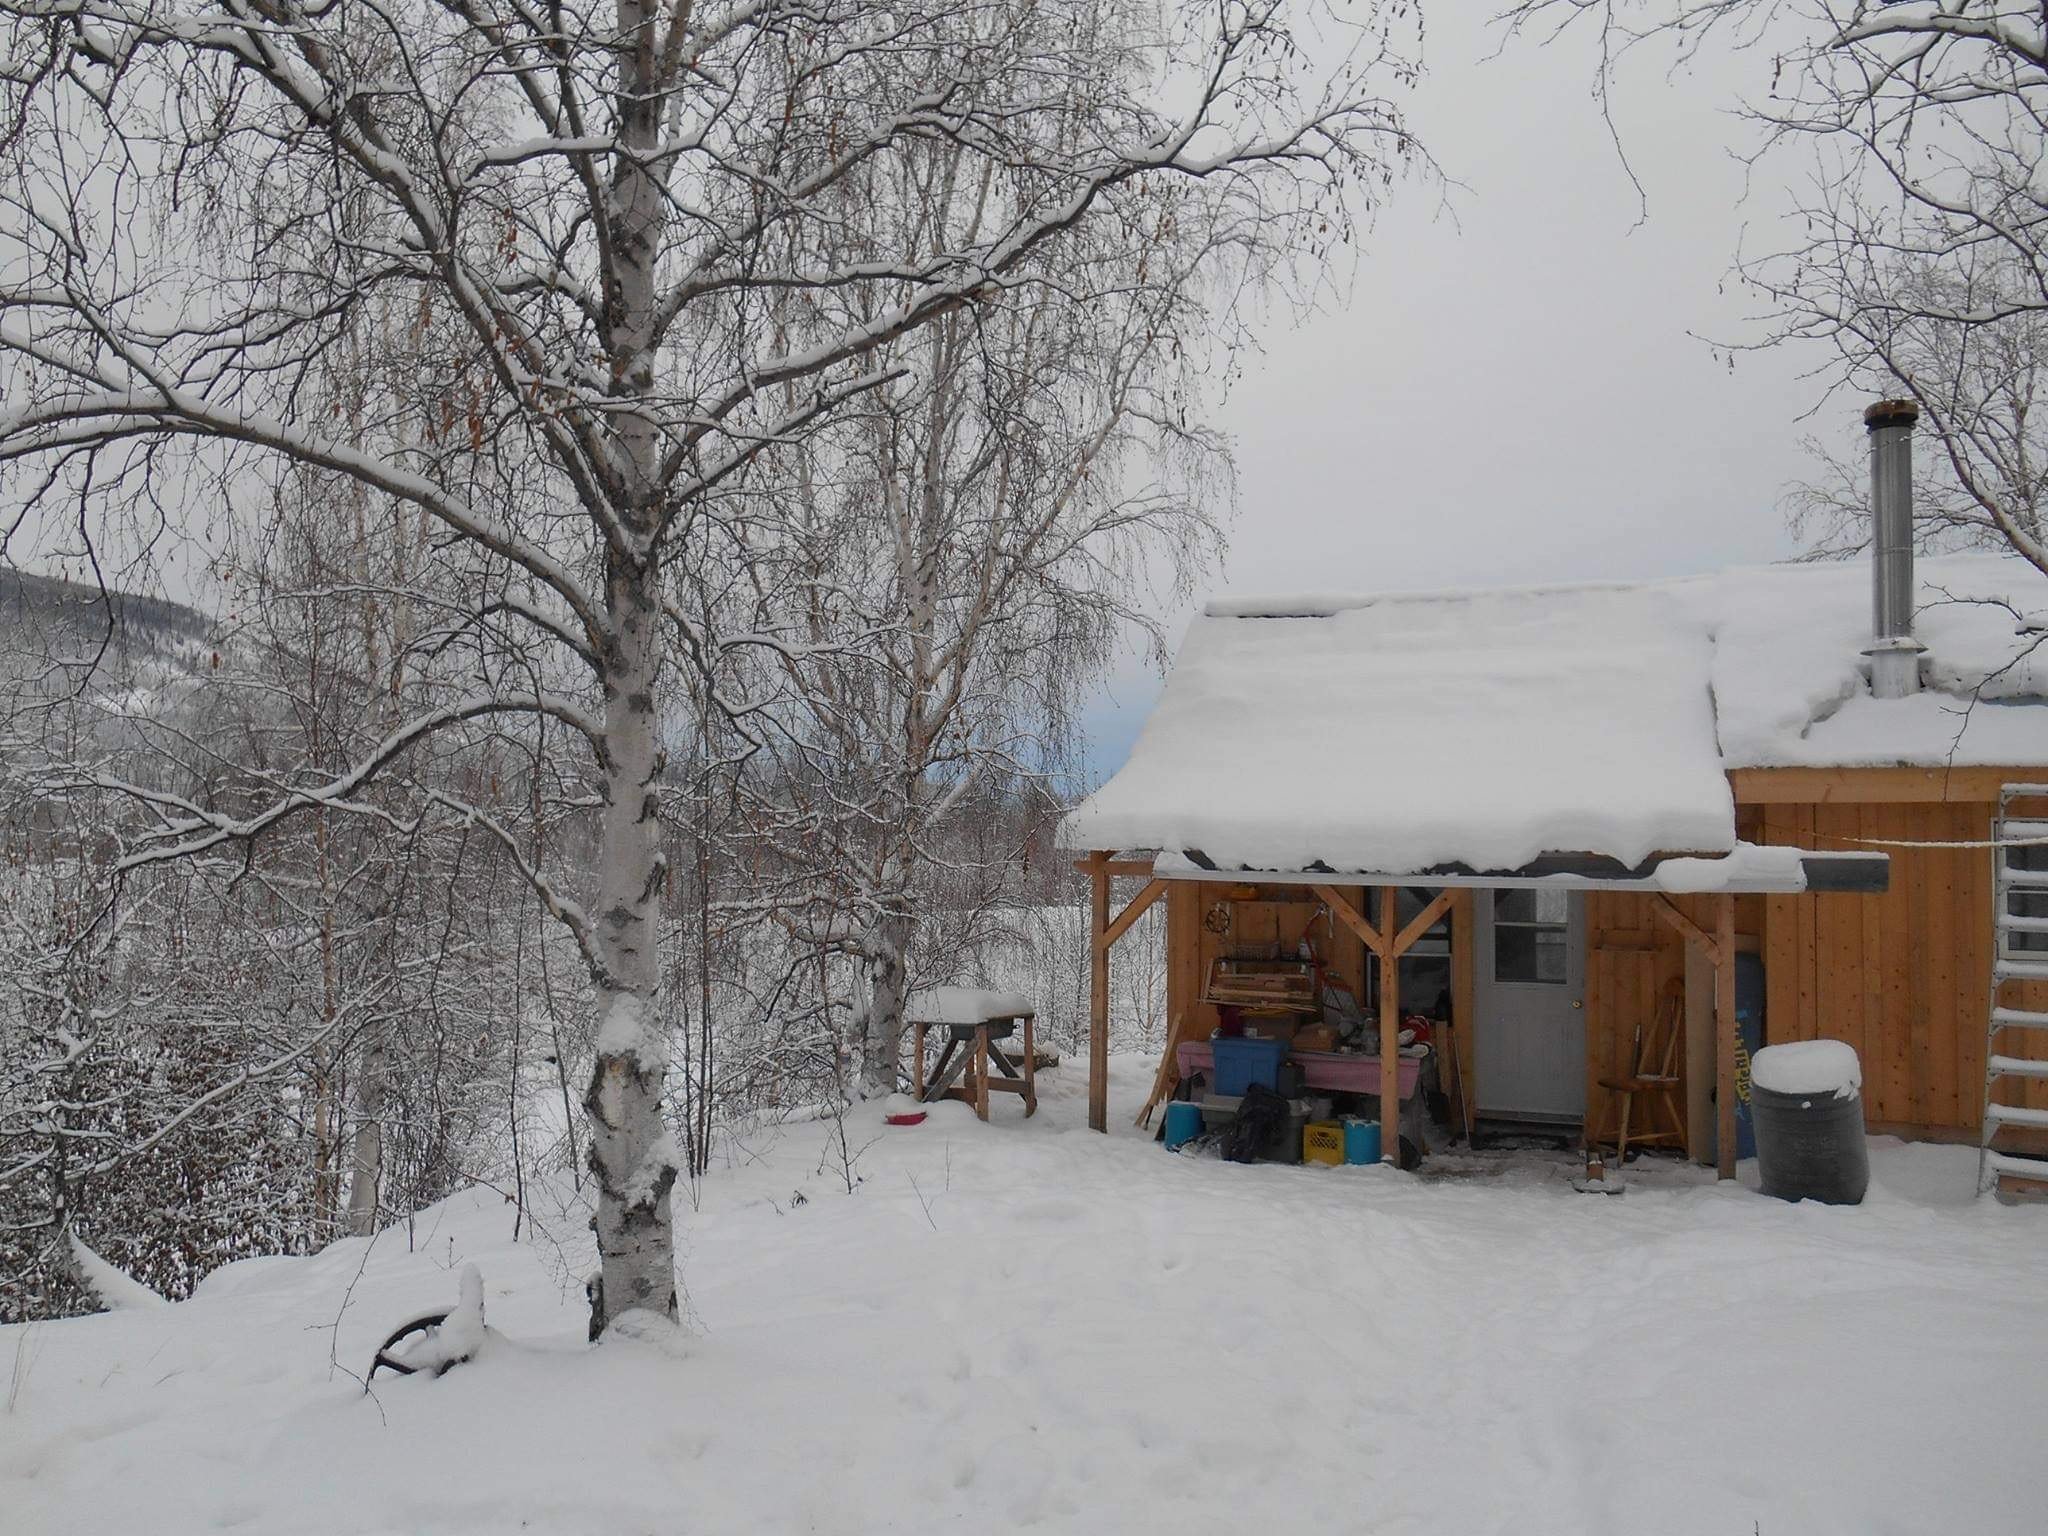 A small wooden hut, covered in snow, surrounded by trees